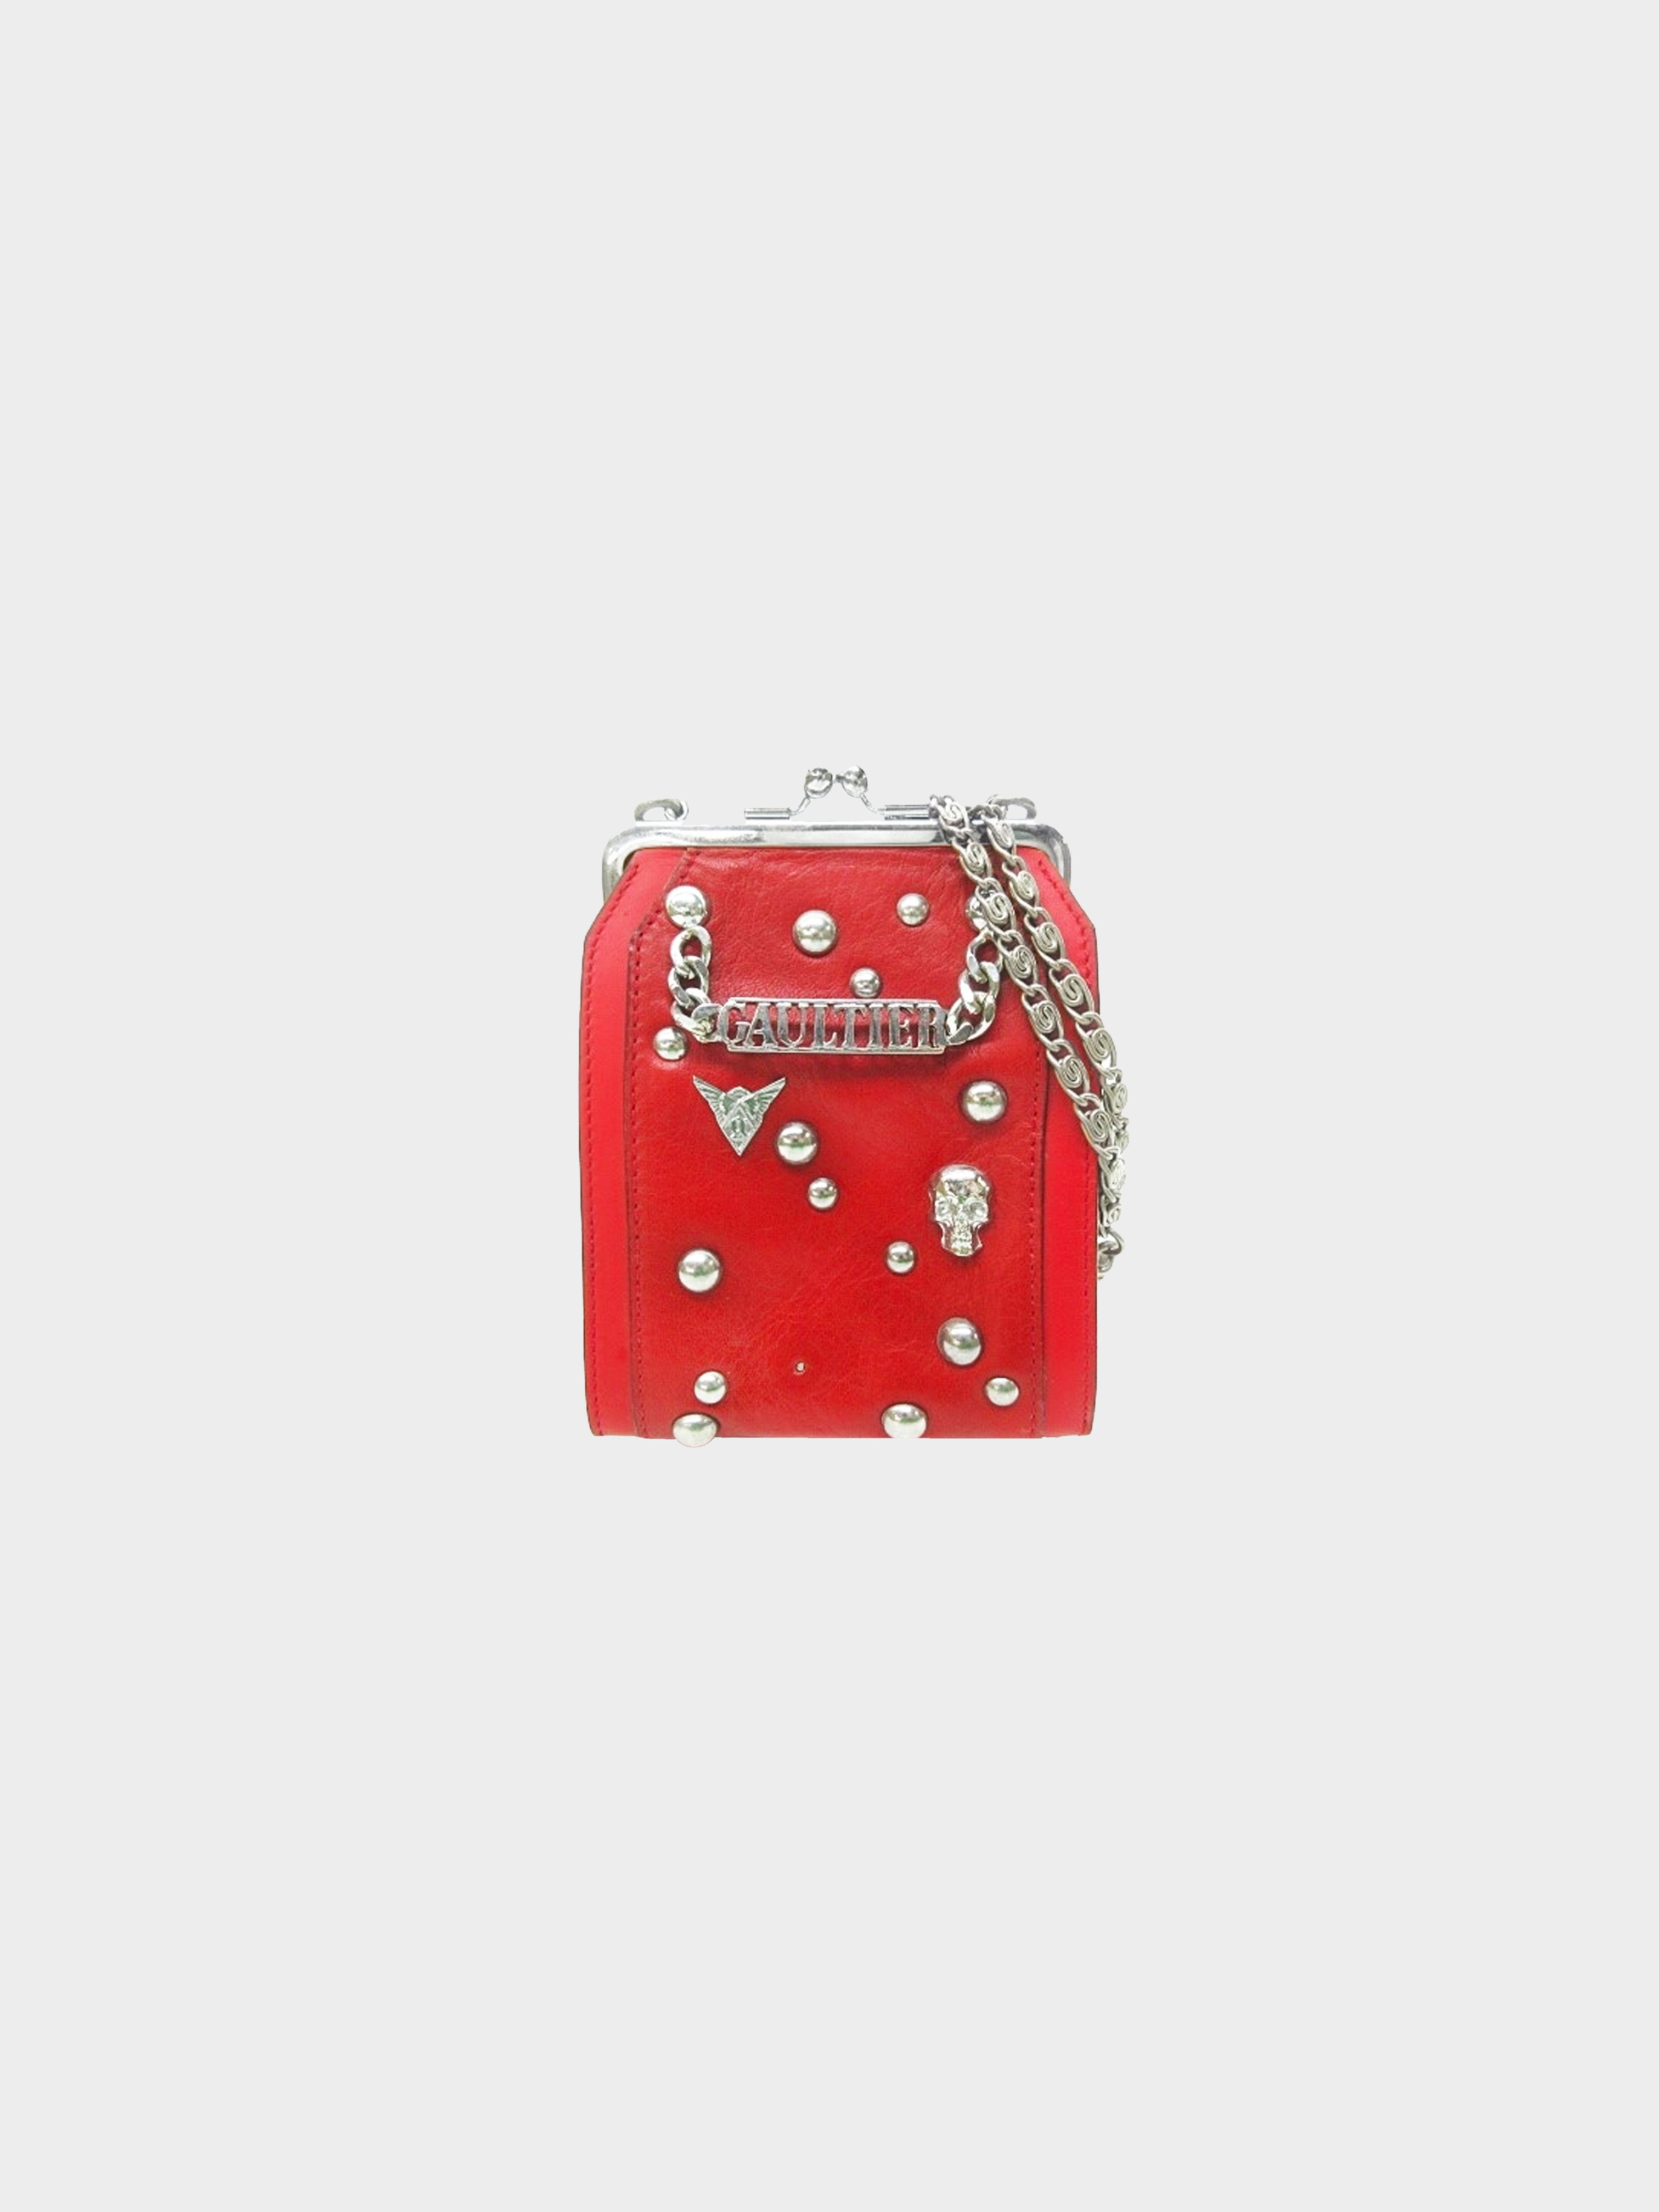 Jean Paul Gaultier s Red Studded Skull Bag · INTO